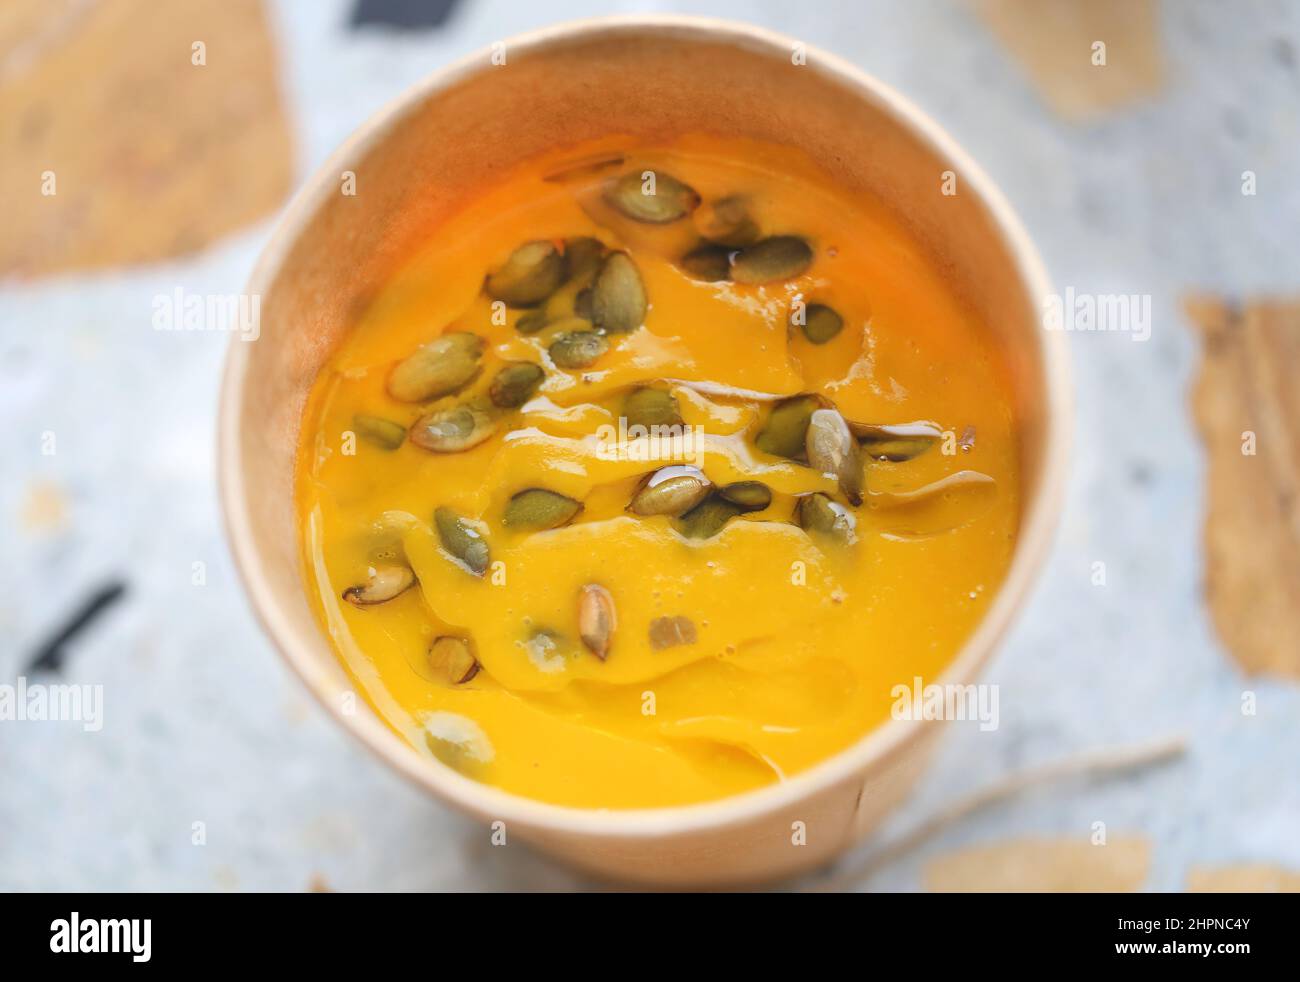 Beautiful delicious pumpkin soup with seeds in a plate photographed close-up Stock Photo